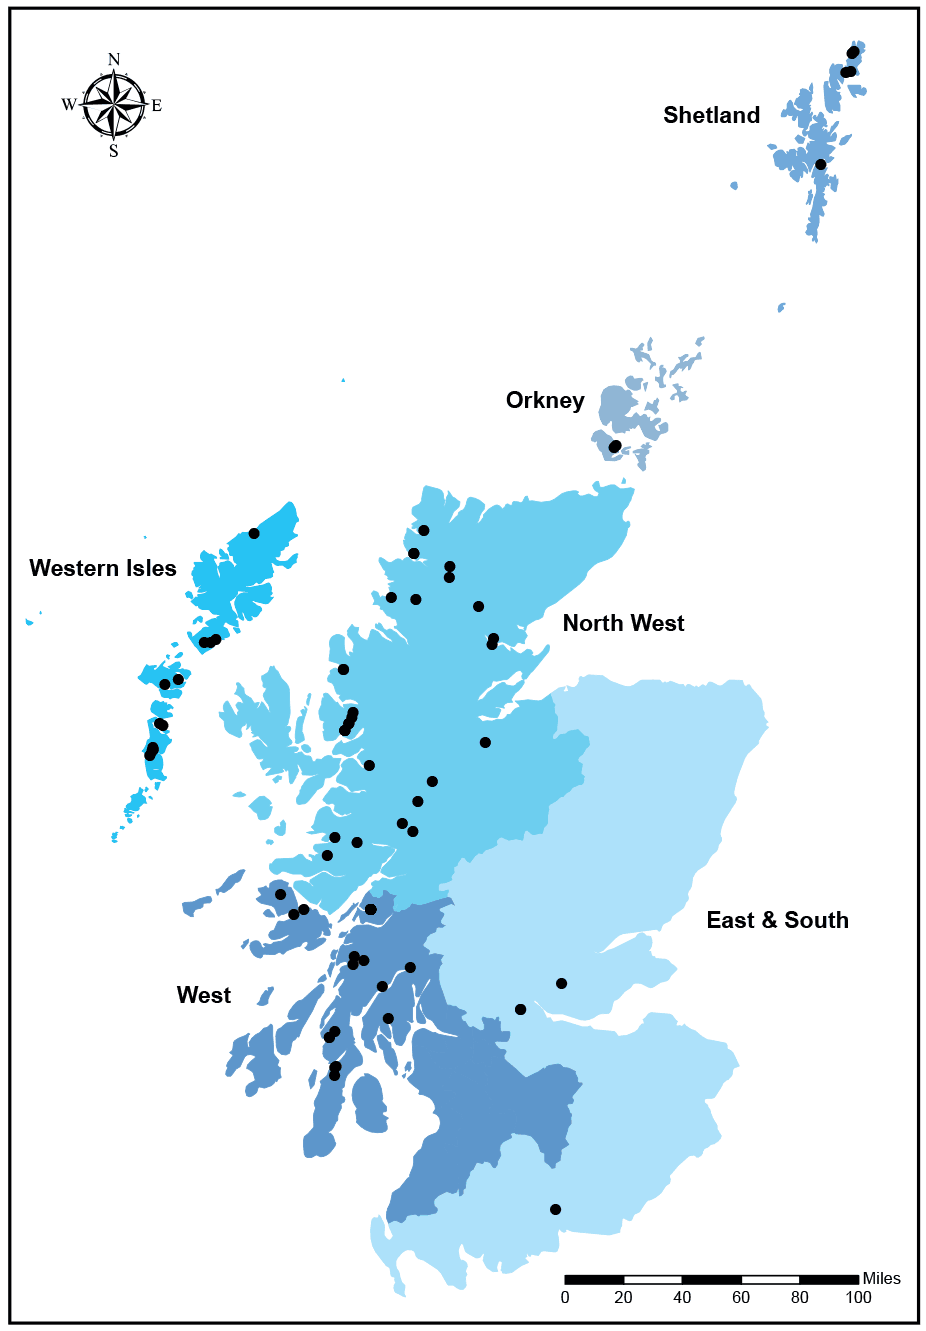 This is a map showing the distribution of active Atlantic salmon smolt sites in Scotland in 2021. The map is split into 6 areas: Shetland, Orkney, North West, East & South, West and Western Isles and has black dots showing where each site is on the map.